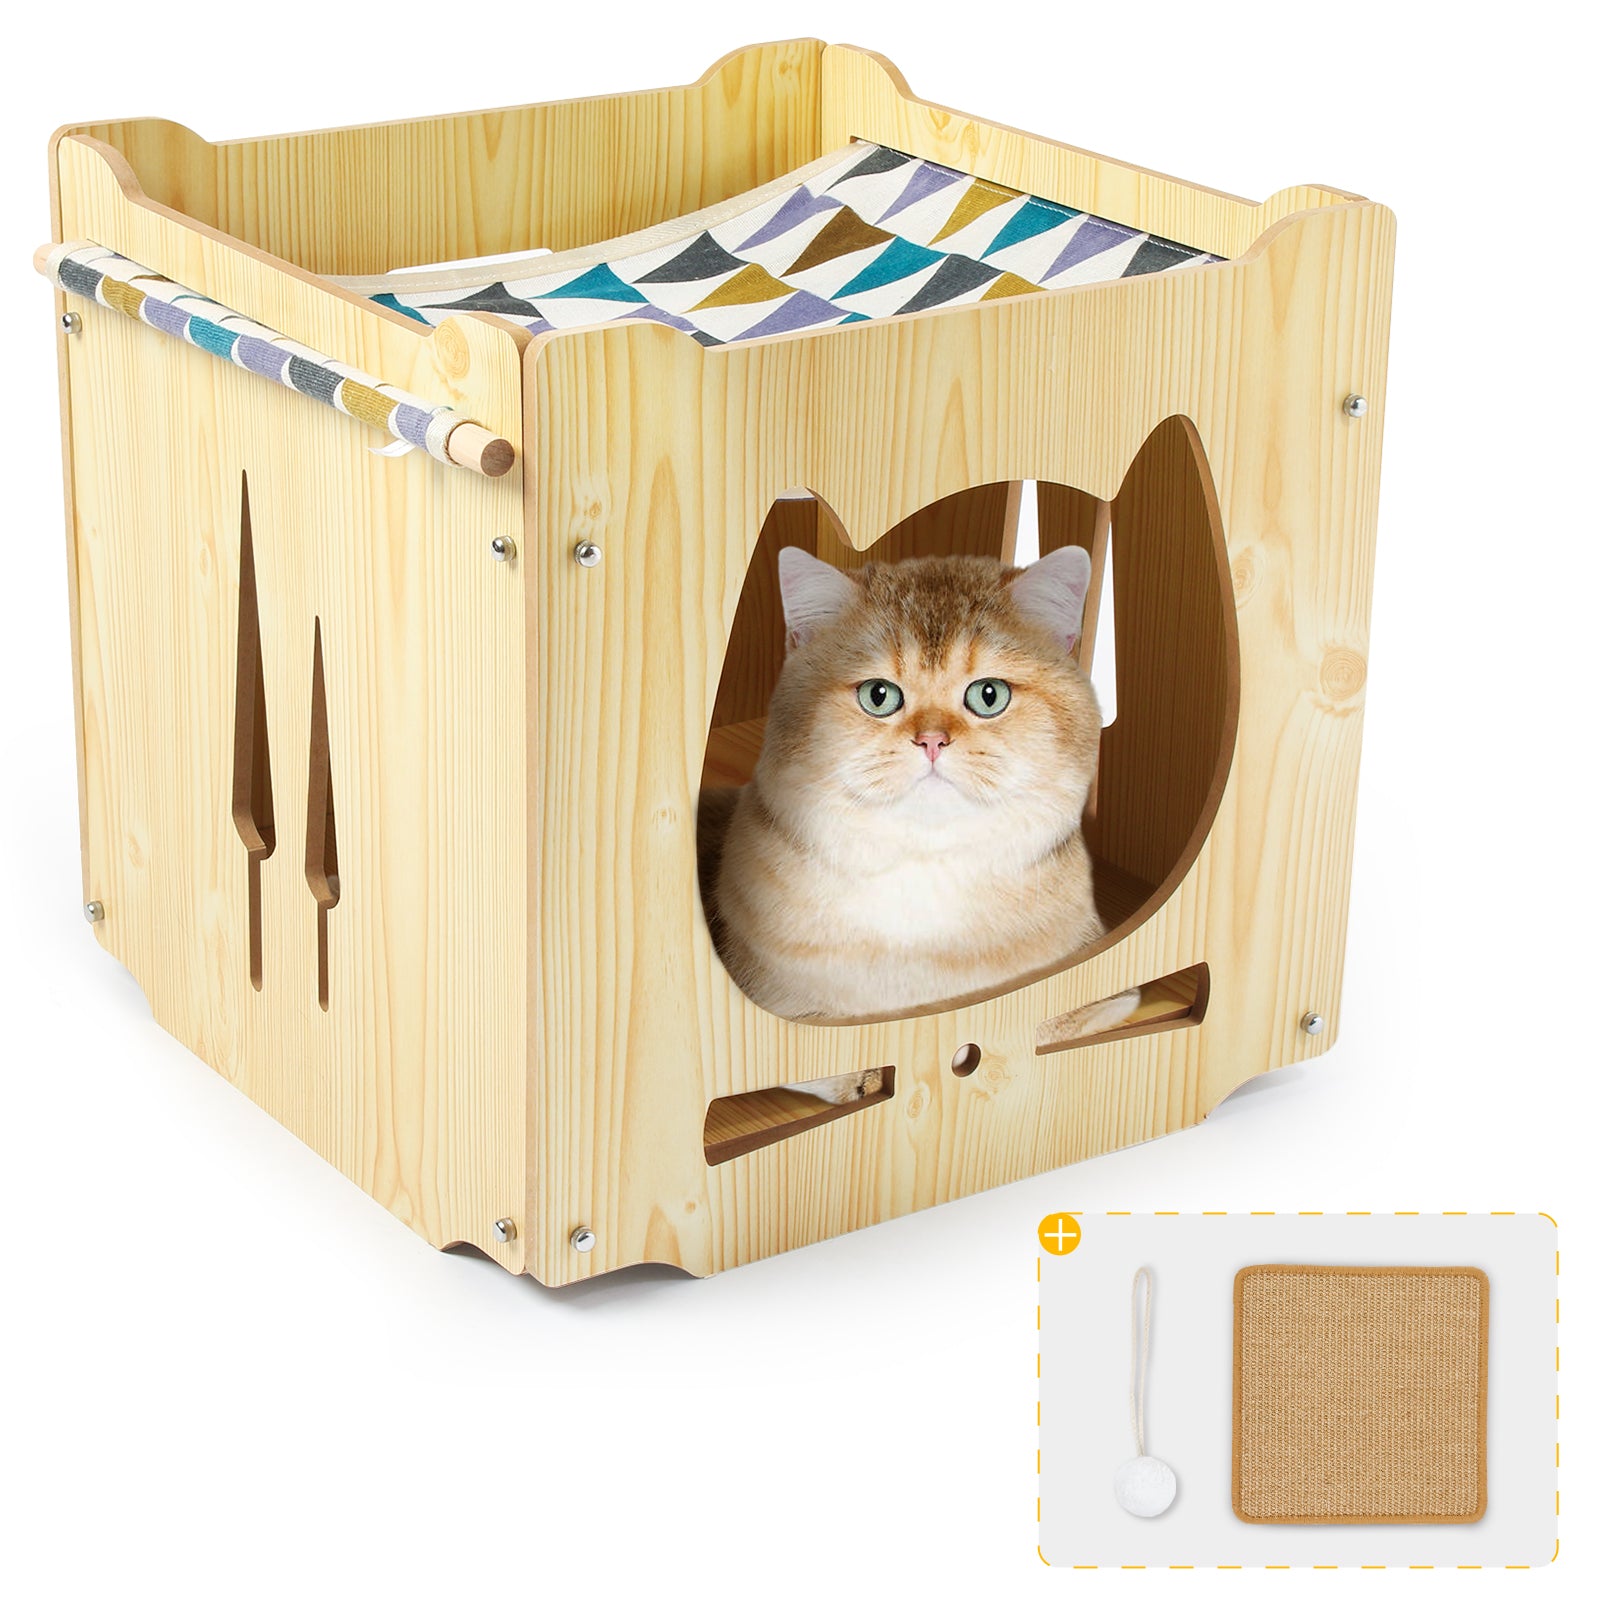 Todeco-Wooden-Cat-House-Double-Layer-Wooden-Cat-Kennel-with-Hammock-34x34x34cm-with-Scratching-Board-Cat-Ball-Cushion-for-Indoors-or-Outdoors-Small-Dogs-and-Cats